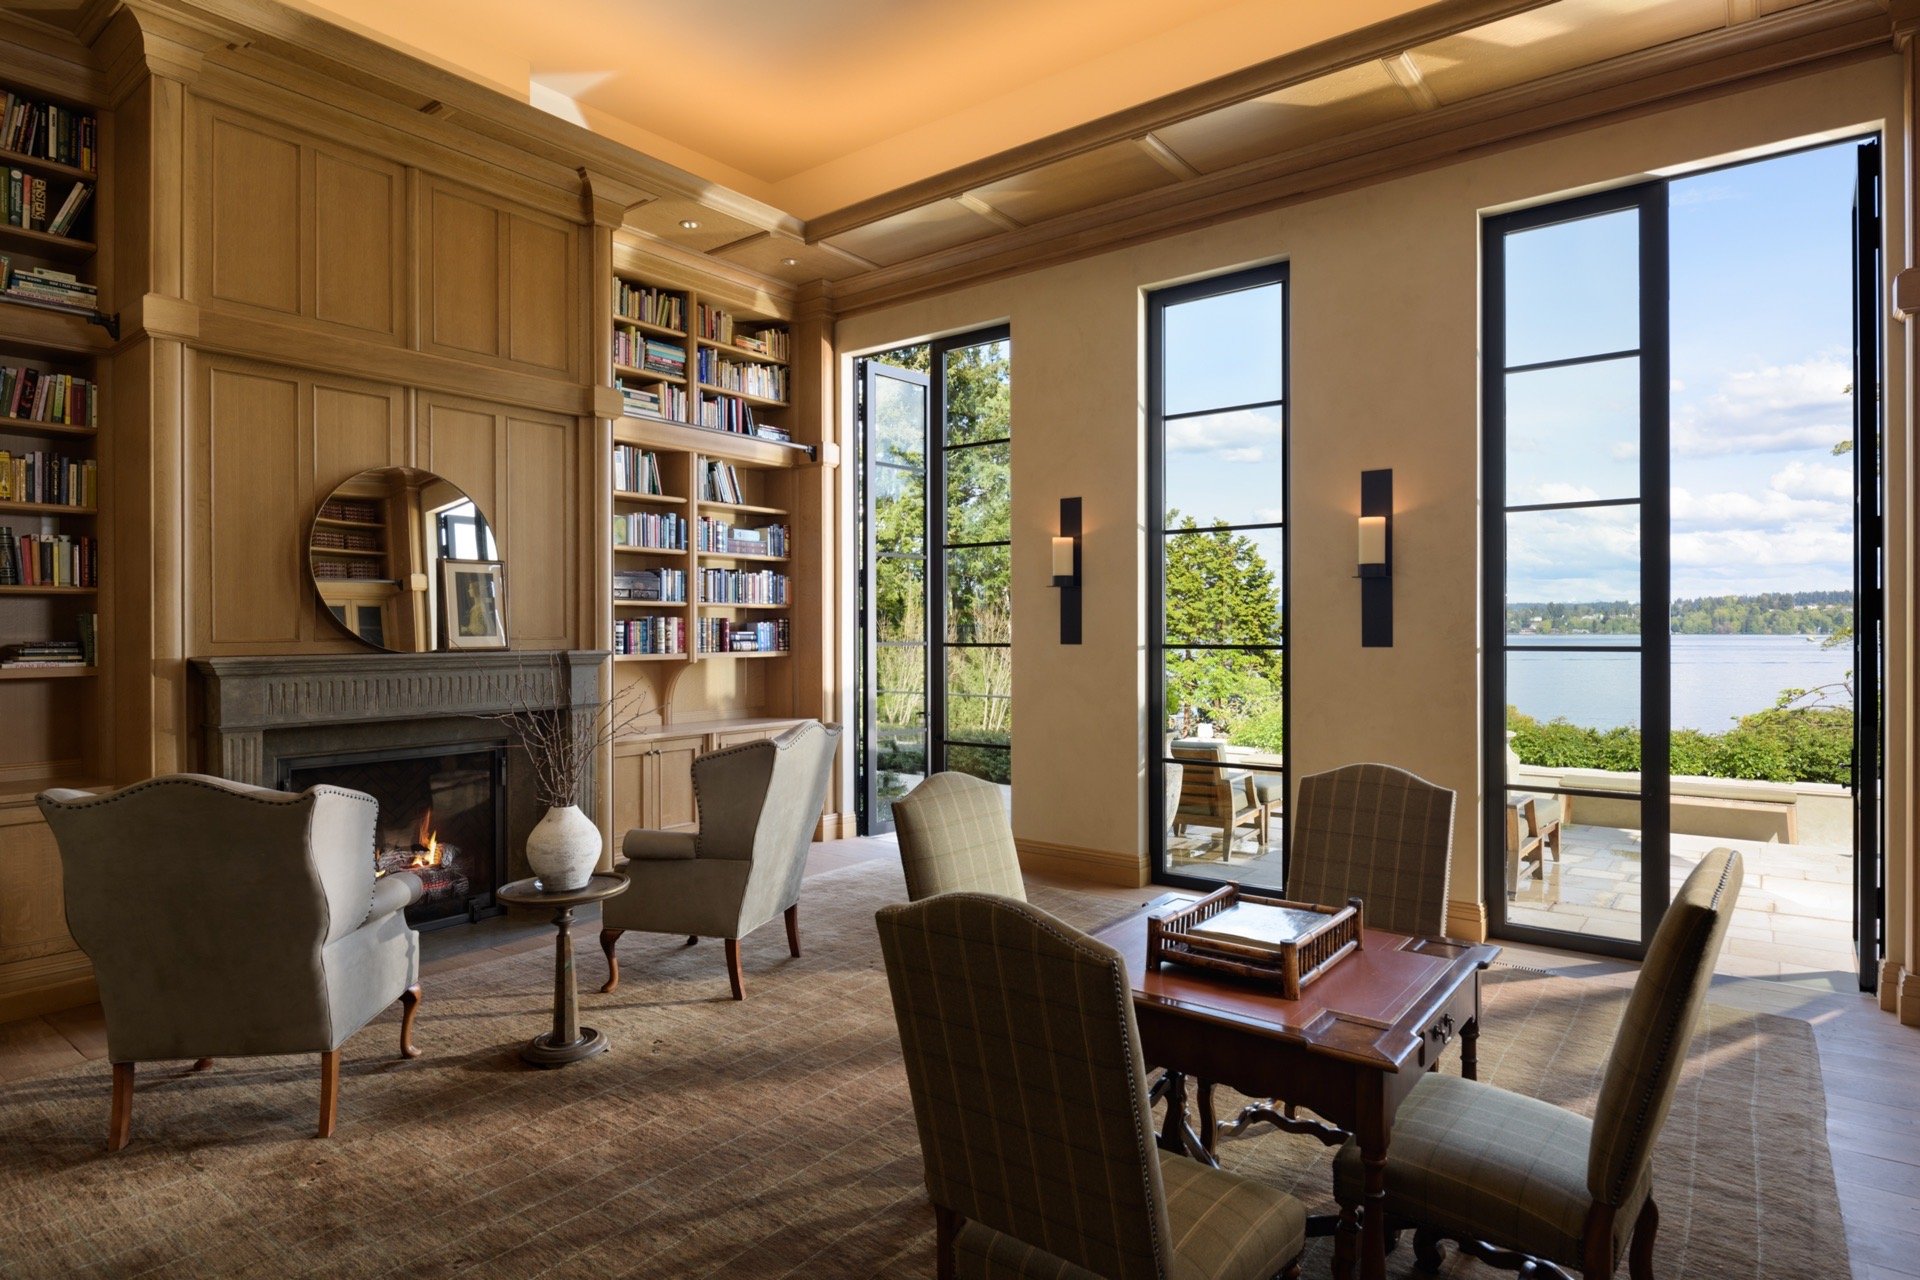 Francis York Waterfront Mansion in Seattle’s Exclusive Enclave, The Reed Estate 31.jpg